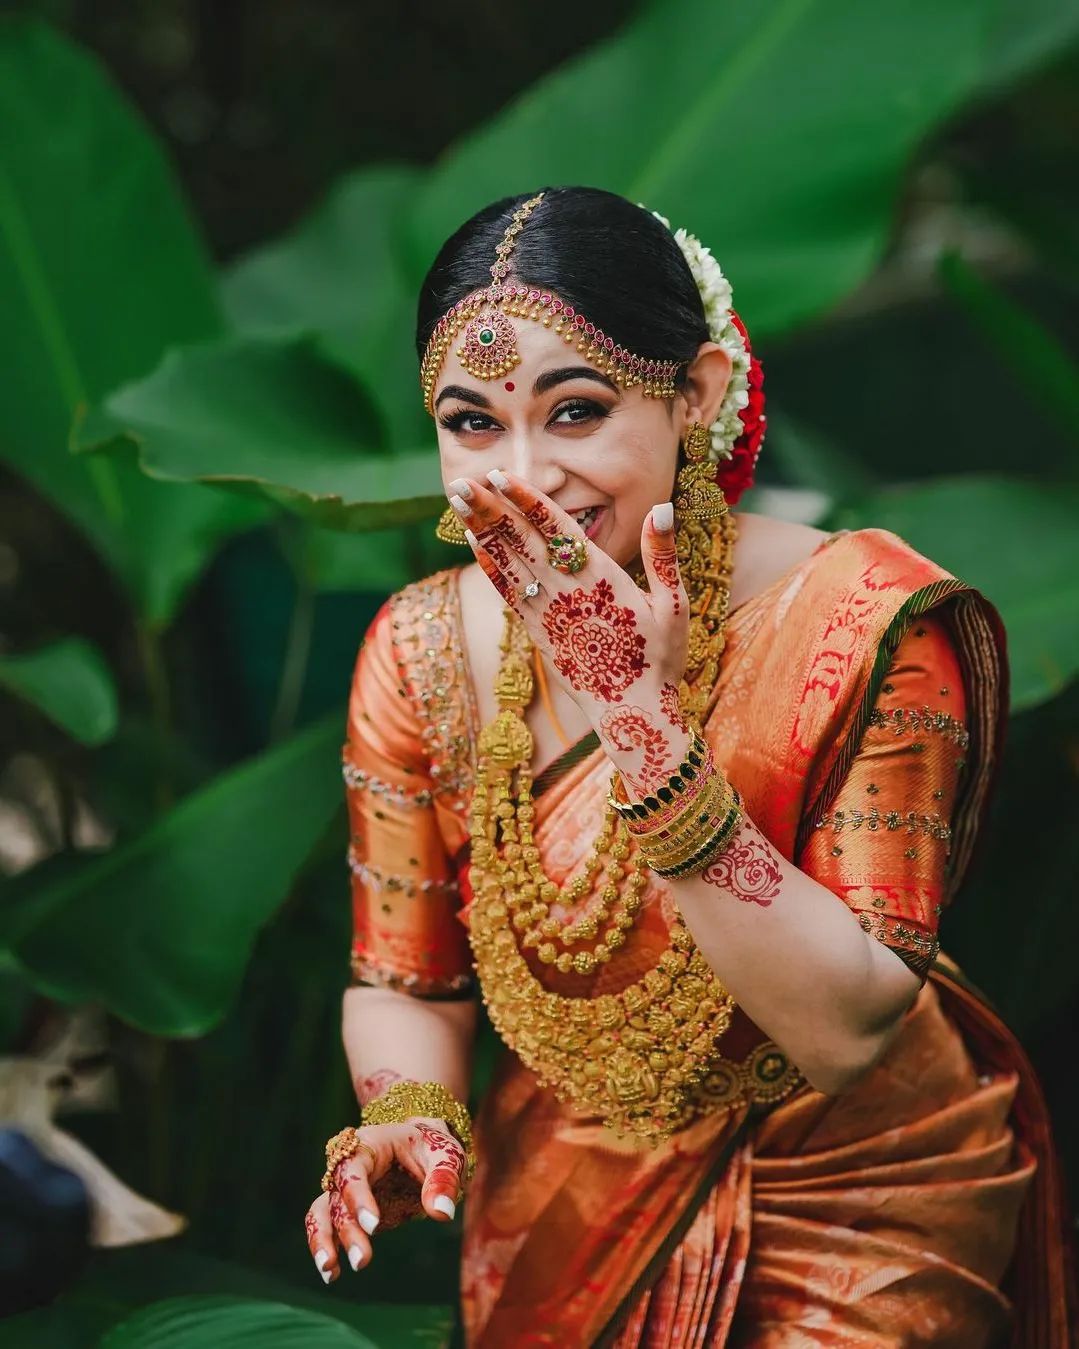 solo bridal photoshoot poses with props- bridal photoshoot ideas Indian-South Indian bridal portraits